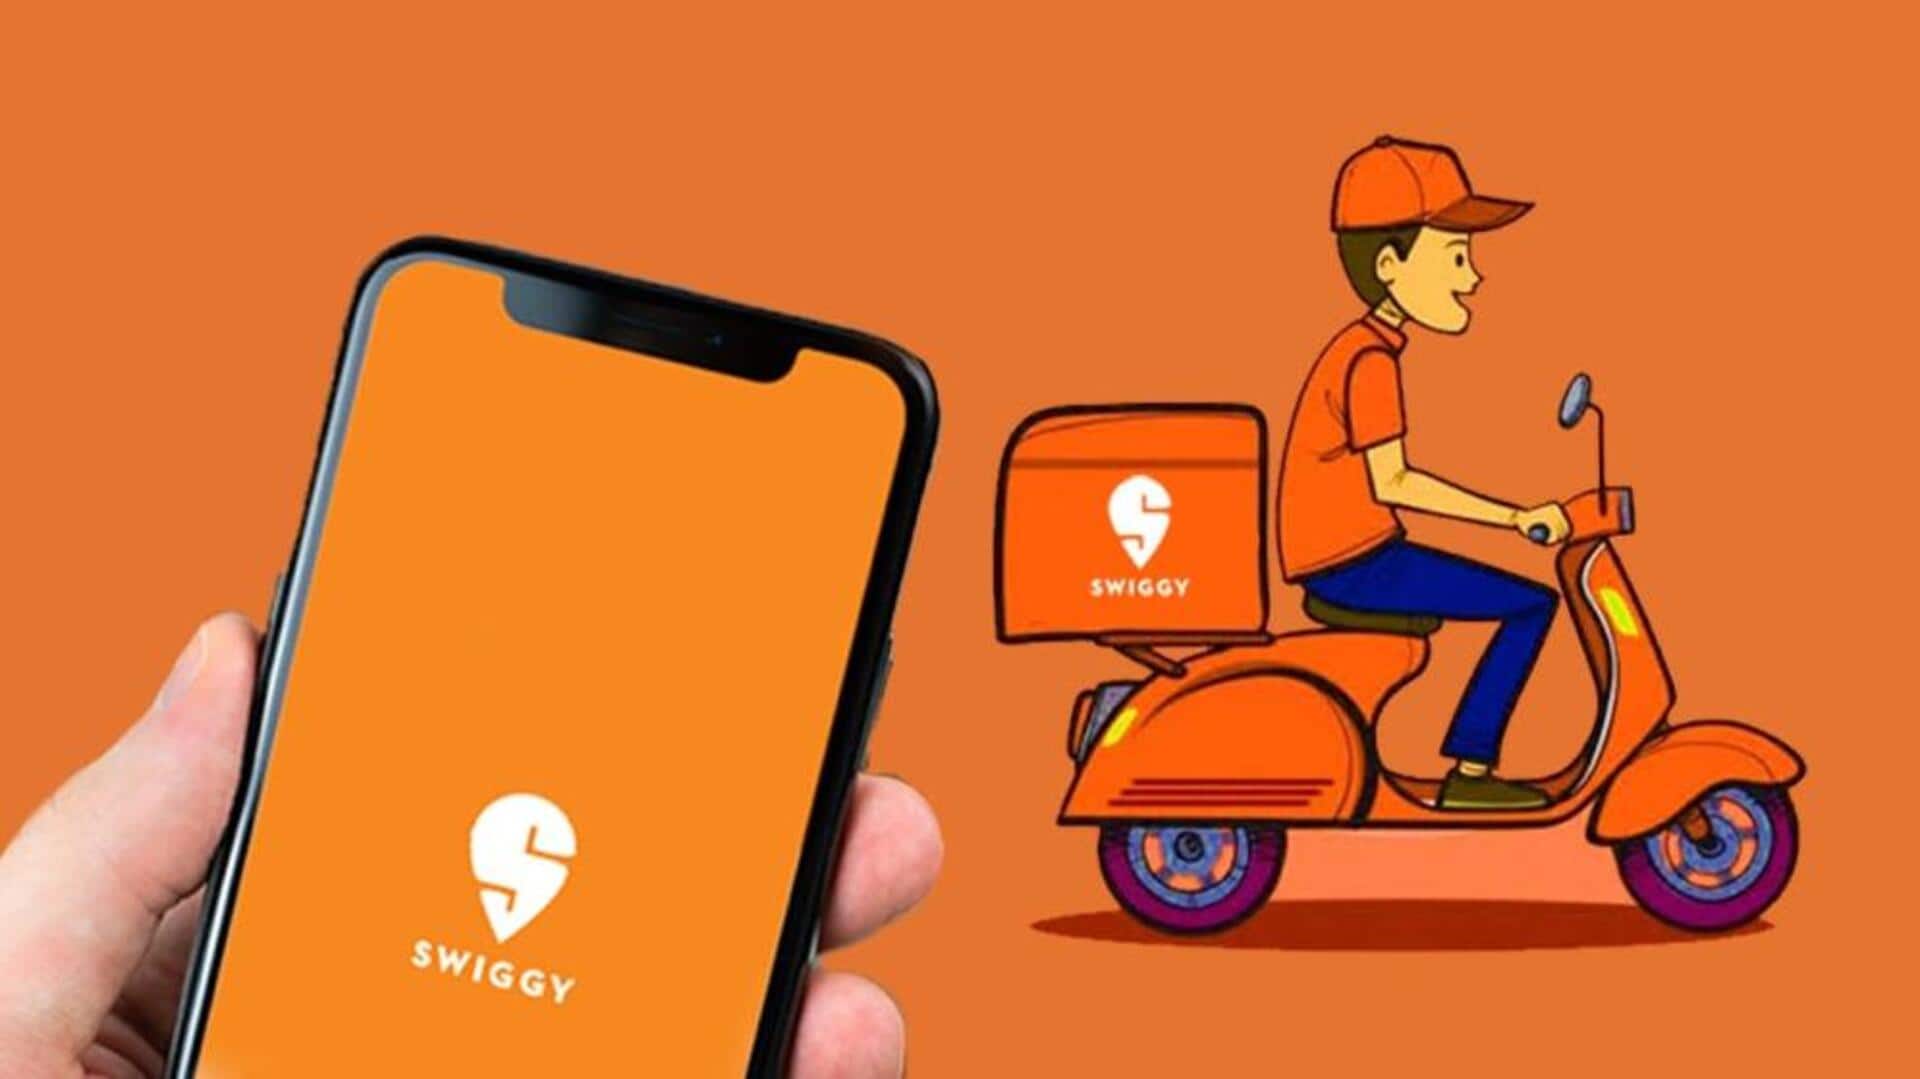 IRCTC partners with Swiggy for delivery of pre-ordered meals